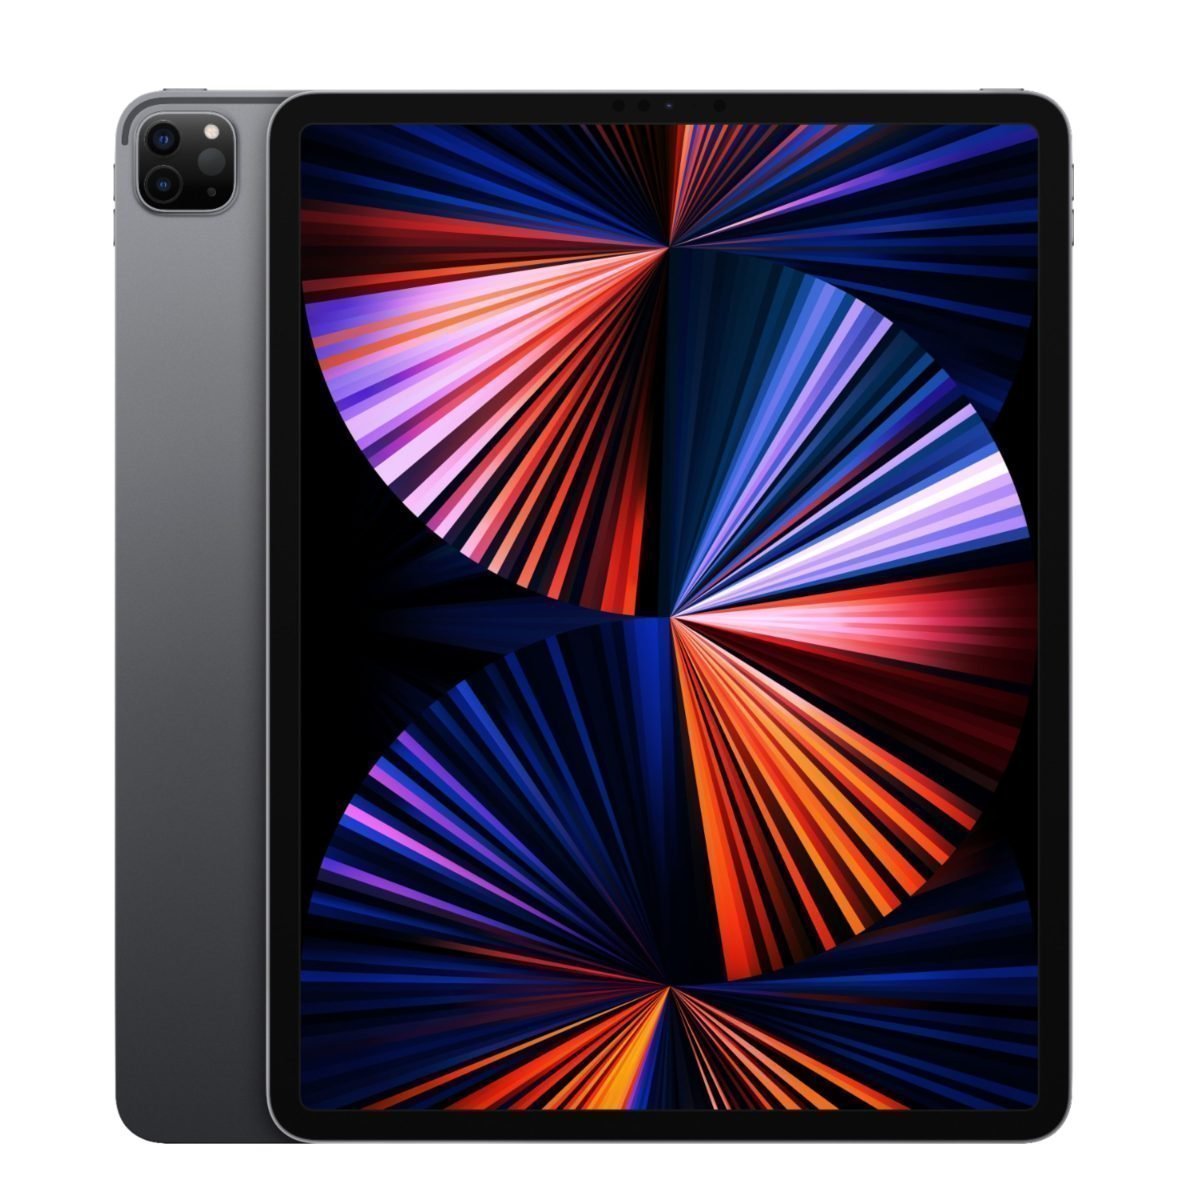 4264603 Sd Scaled Apple &Amp;Lt;H1&Amp;Gt;Apple - 12.9-Inch Ipad Pro Latest Model With Wi-Fi - 256Gb - Space Gray&Amp;Lt;/H1&Amp;Gt; Ipad Pro Features The Powerful Apple M1 Chip For Next-Level Performance And All-Day Battery Life.an Immersive 12.9-Inch Liquid Retina Xdr Display For Viewing And Editing Hdr Photos And Videos. And A Front Camera With Center Stage Keeps You In Frame Automatically During Video Calls. Ipad Pro Has Pro Cameras And A Lidar Scanner For Stunning Photos, Videos, And Immersive Ar. Thunderbolt For Connecting To High-Performance Accessories. And You Can Add Apple Pencil For Note-Taking, Drawing, And Marking Up Documents, And The Magic Keyboard For A Responsive Typing Experience And Trackpad. Ipad Pro Apple 12.9-Inch Ipad Pro Latest Model With Wi-Fi - 256Gb - Space Gray Mhnh3